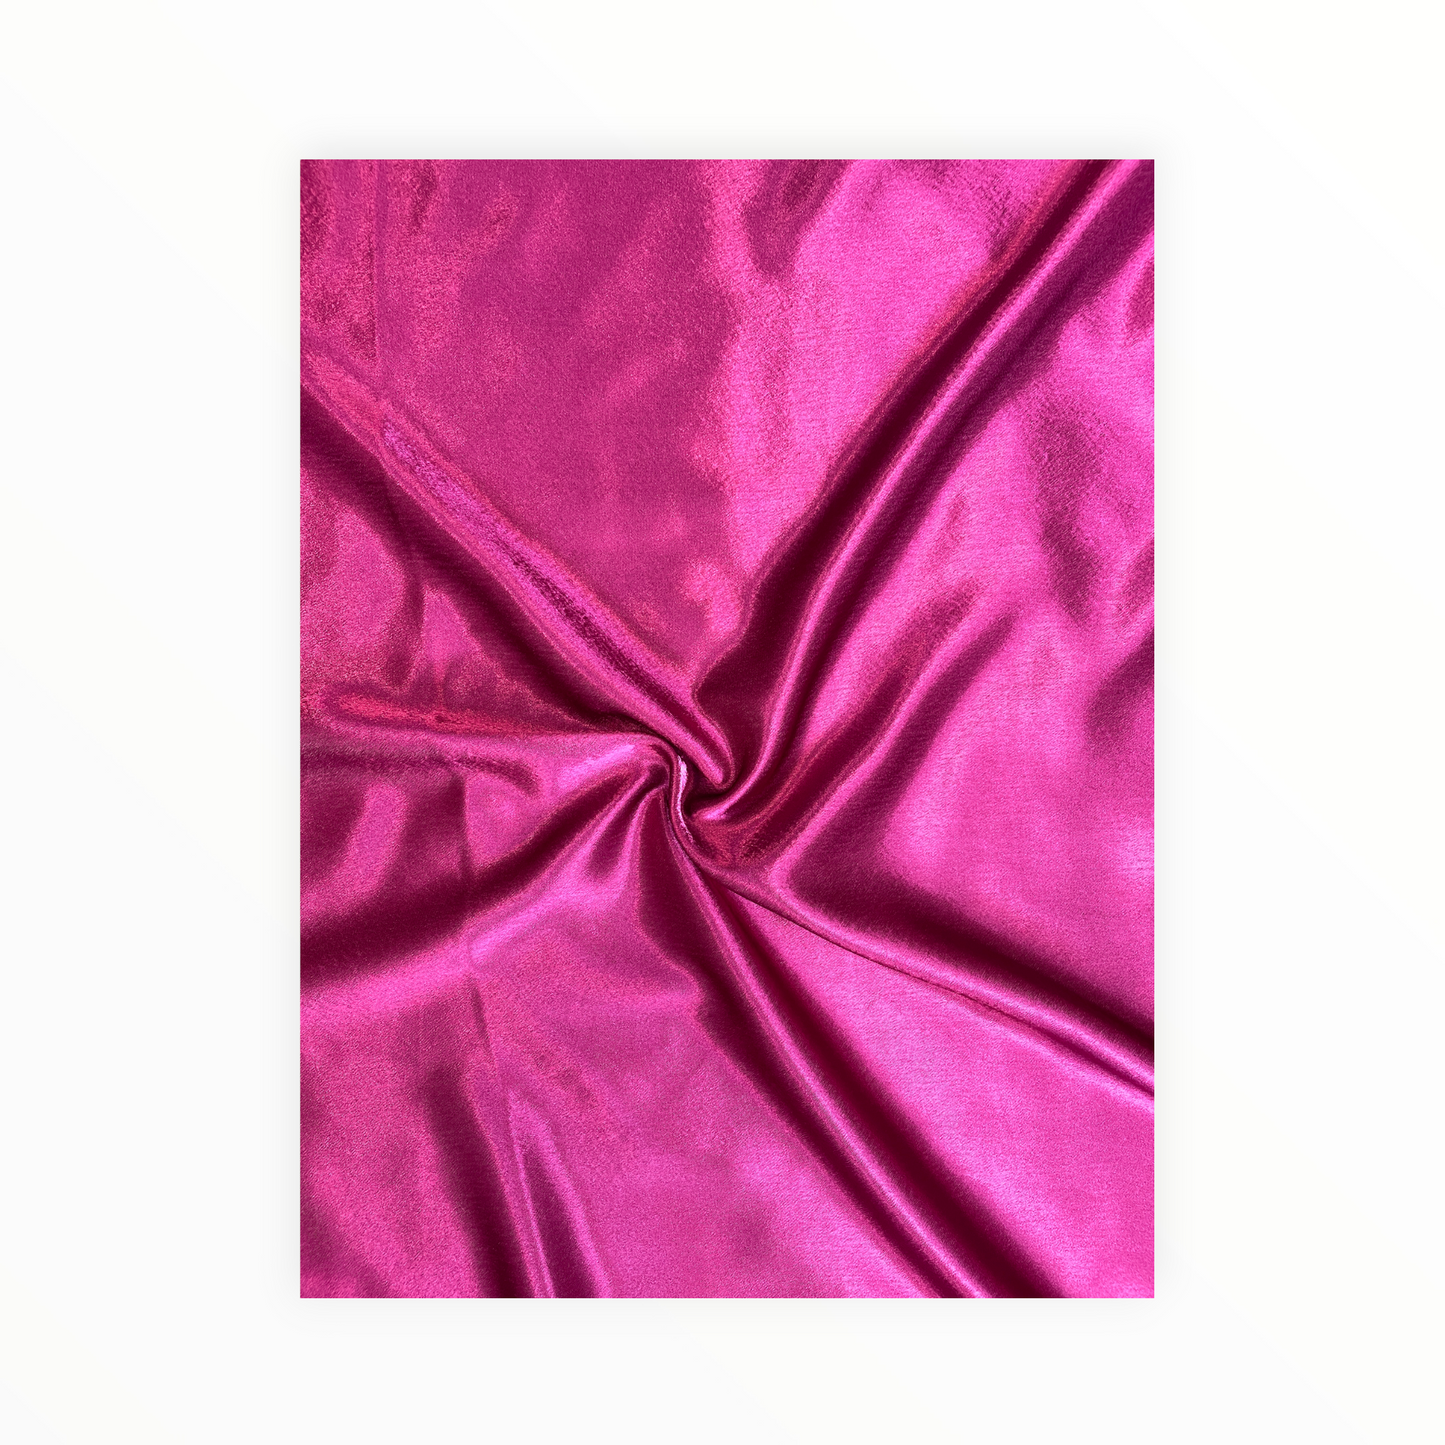 Cherry Red Silky Smooth Crepe Satin